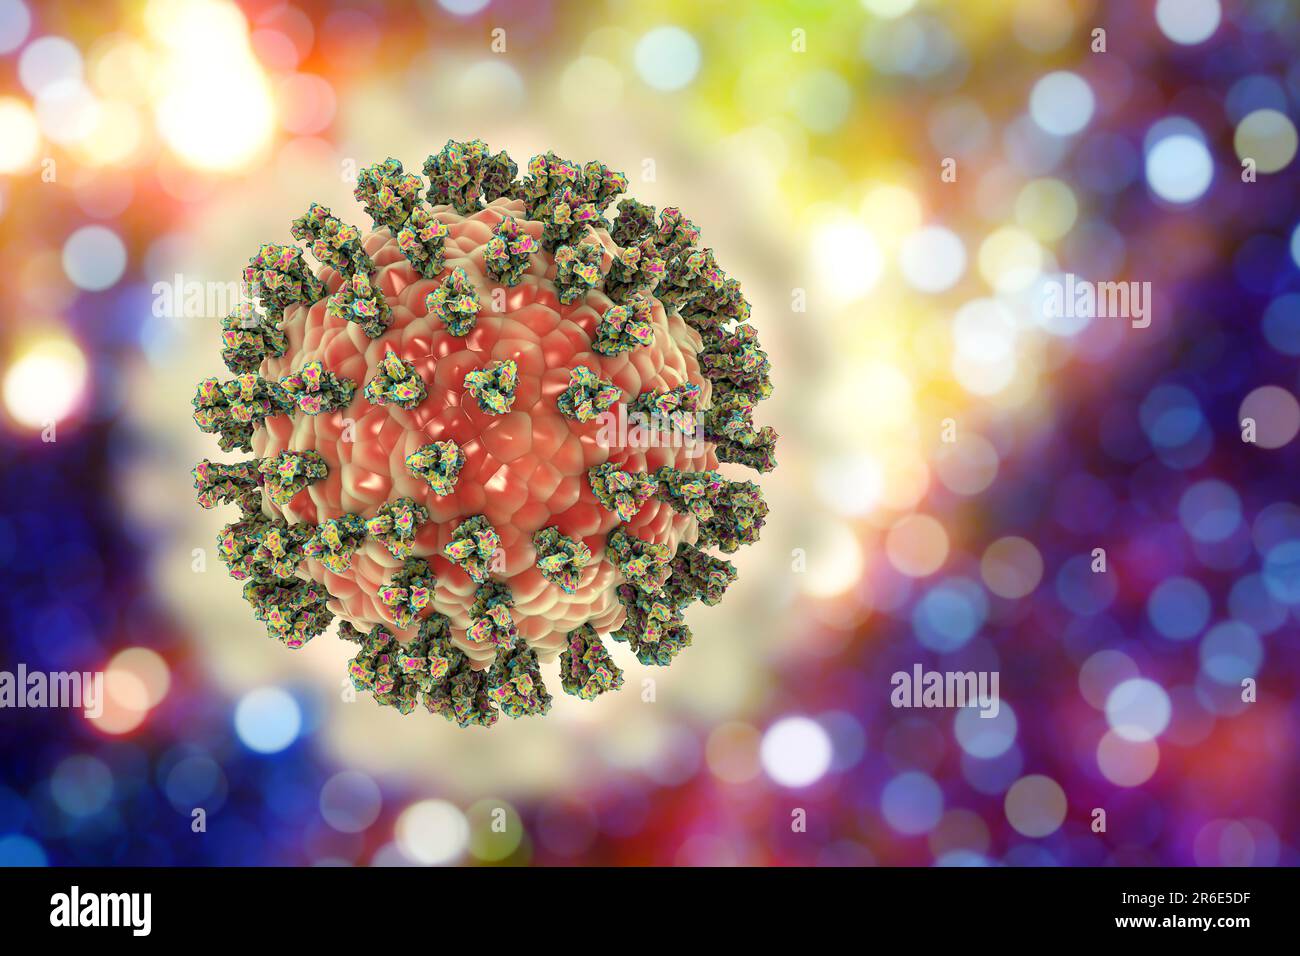 Human parainfluenza virus (HPIV), computor illustration. HPIV is a paramyxovirus that causes different types of respiratory infections, including ear Stock Photo